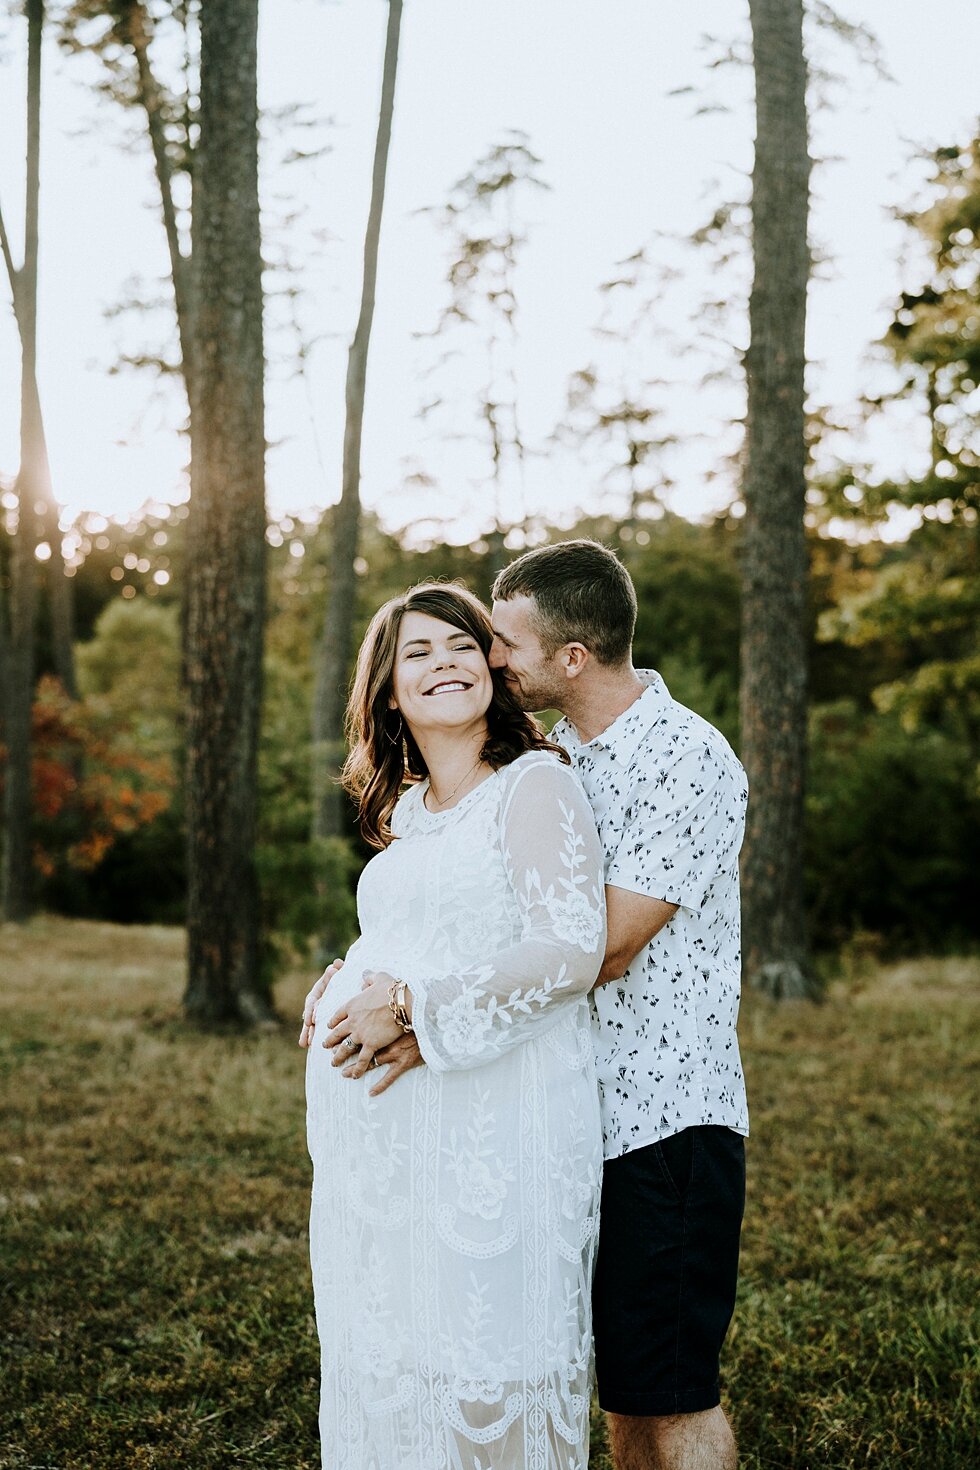  These two couldn’t stop smiling during their maternity session! Mom’s dress was fantastic! #maternitygoals #maternityphotographer #babybump #outdoorphotosession #kentuckyphotographer #indianaphotographer #louisvillephotographer #maternityphotos #exp